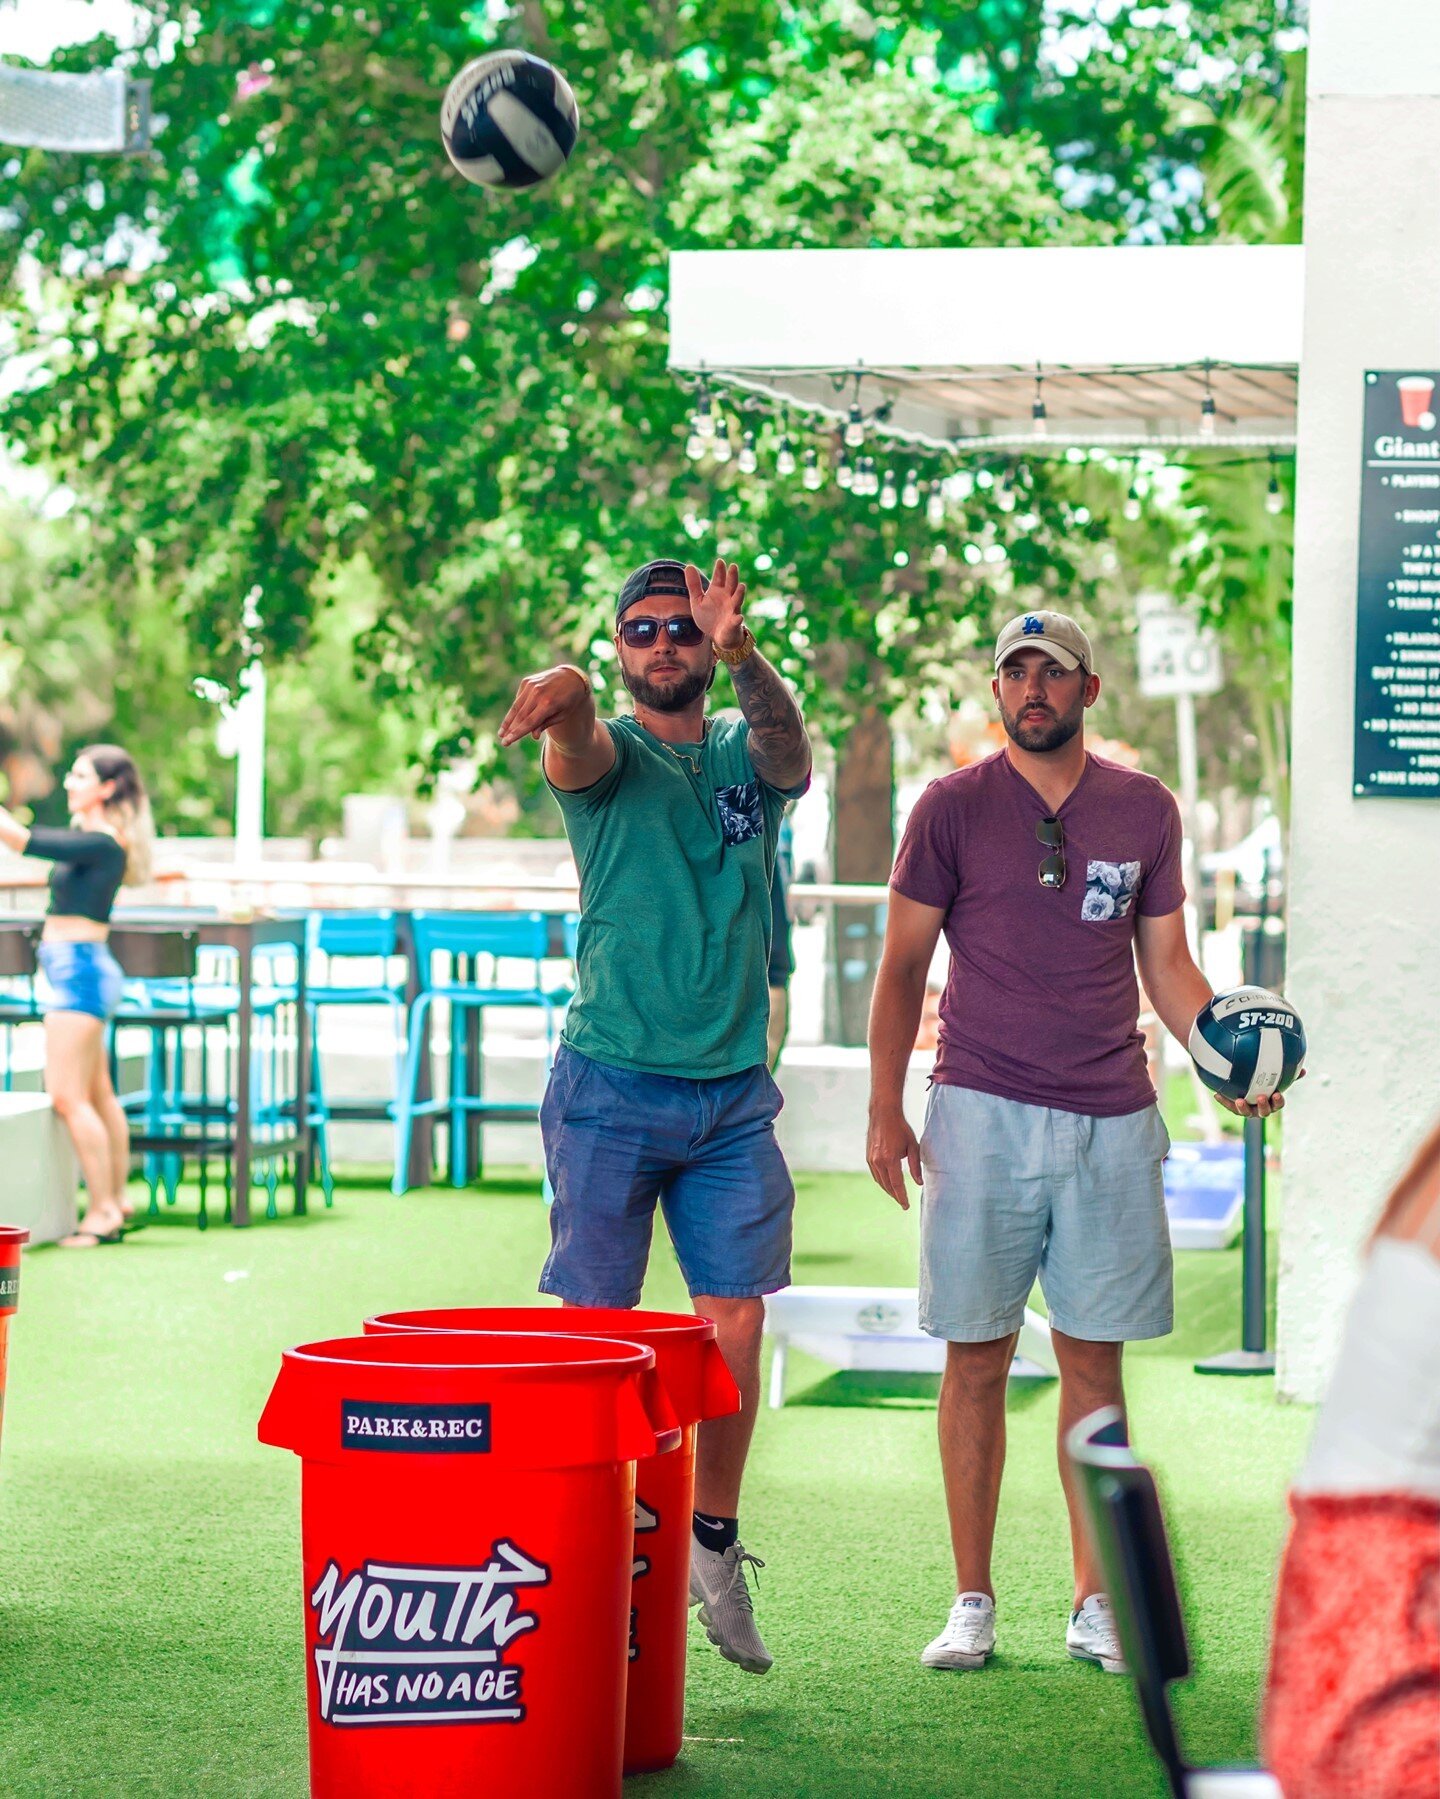 Nothin' but bucket! 🏐🛢️⁠
Enter our Giant Bucket Pong Tournament WEDNESDAY night&mdash;we've got a @beatsbydre Pill+ up for the winners! Food &amp; drink specials, throwback hits by @djd2_tampa too. #ParkRecTPA (Details at link in bio &amp; in our s